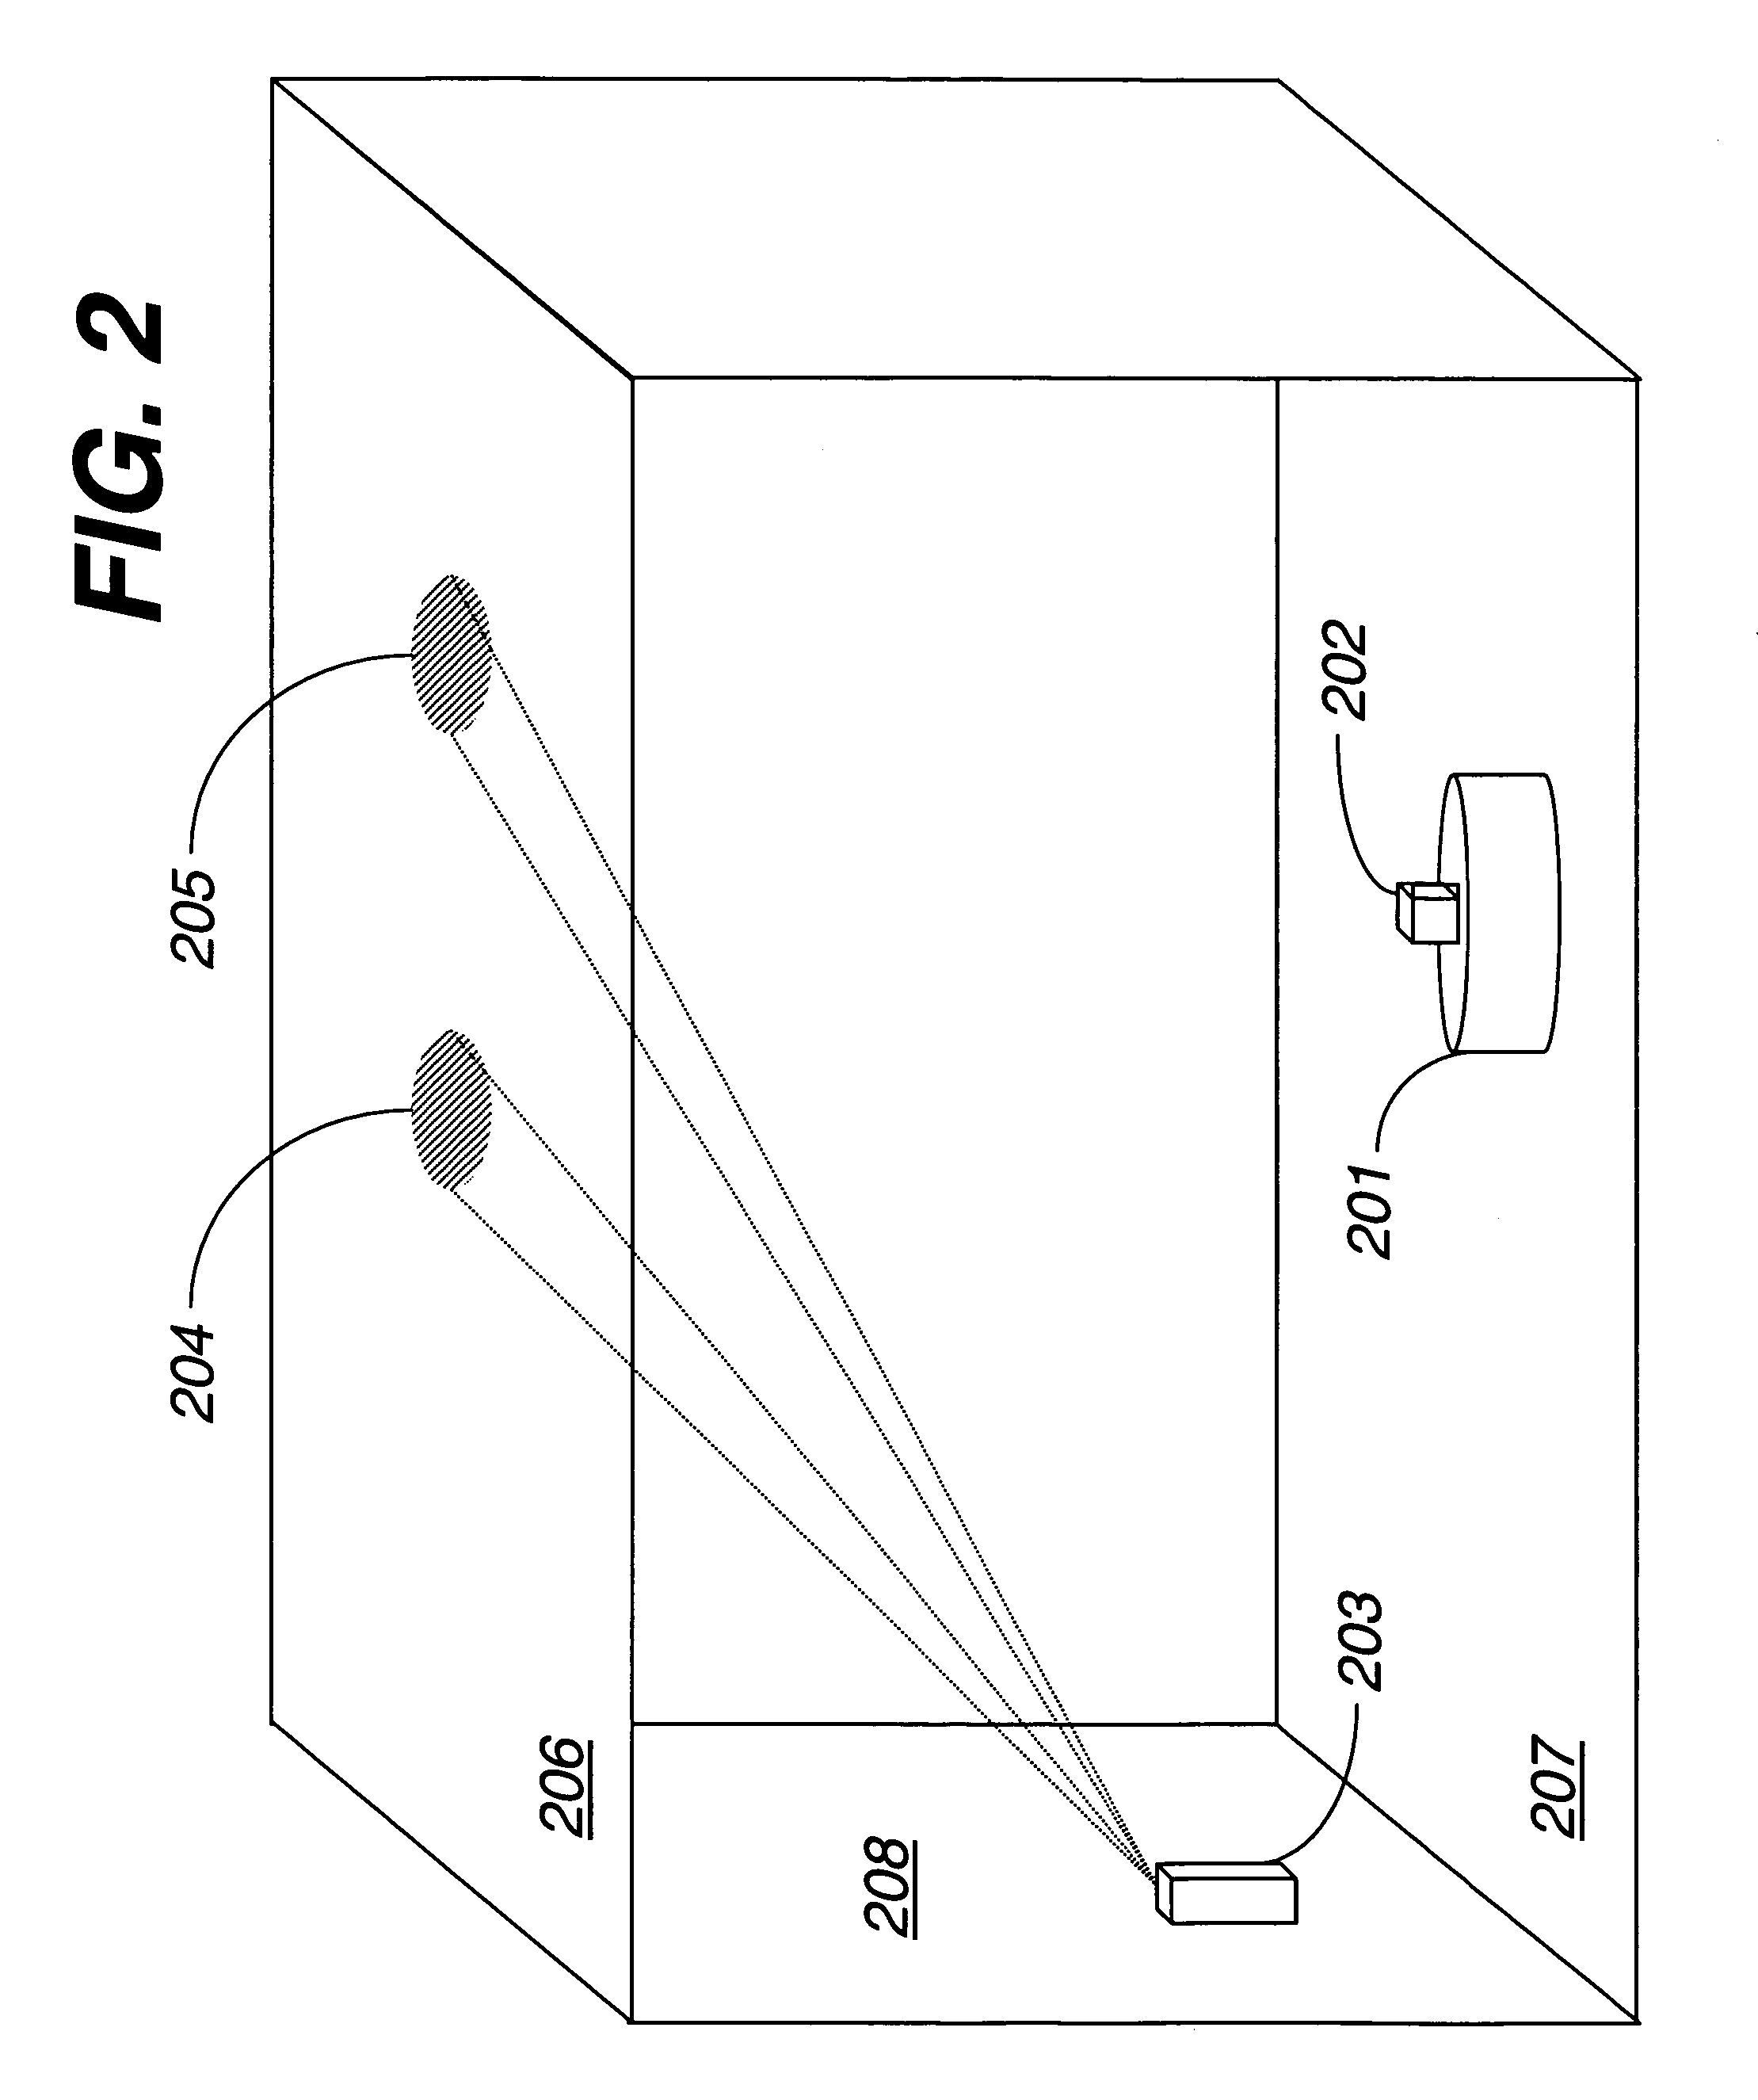 Methods and apparatus for position estimation using reflected light sources